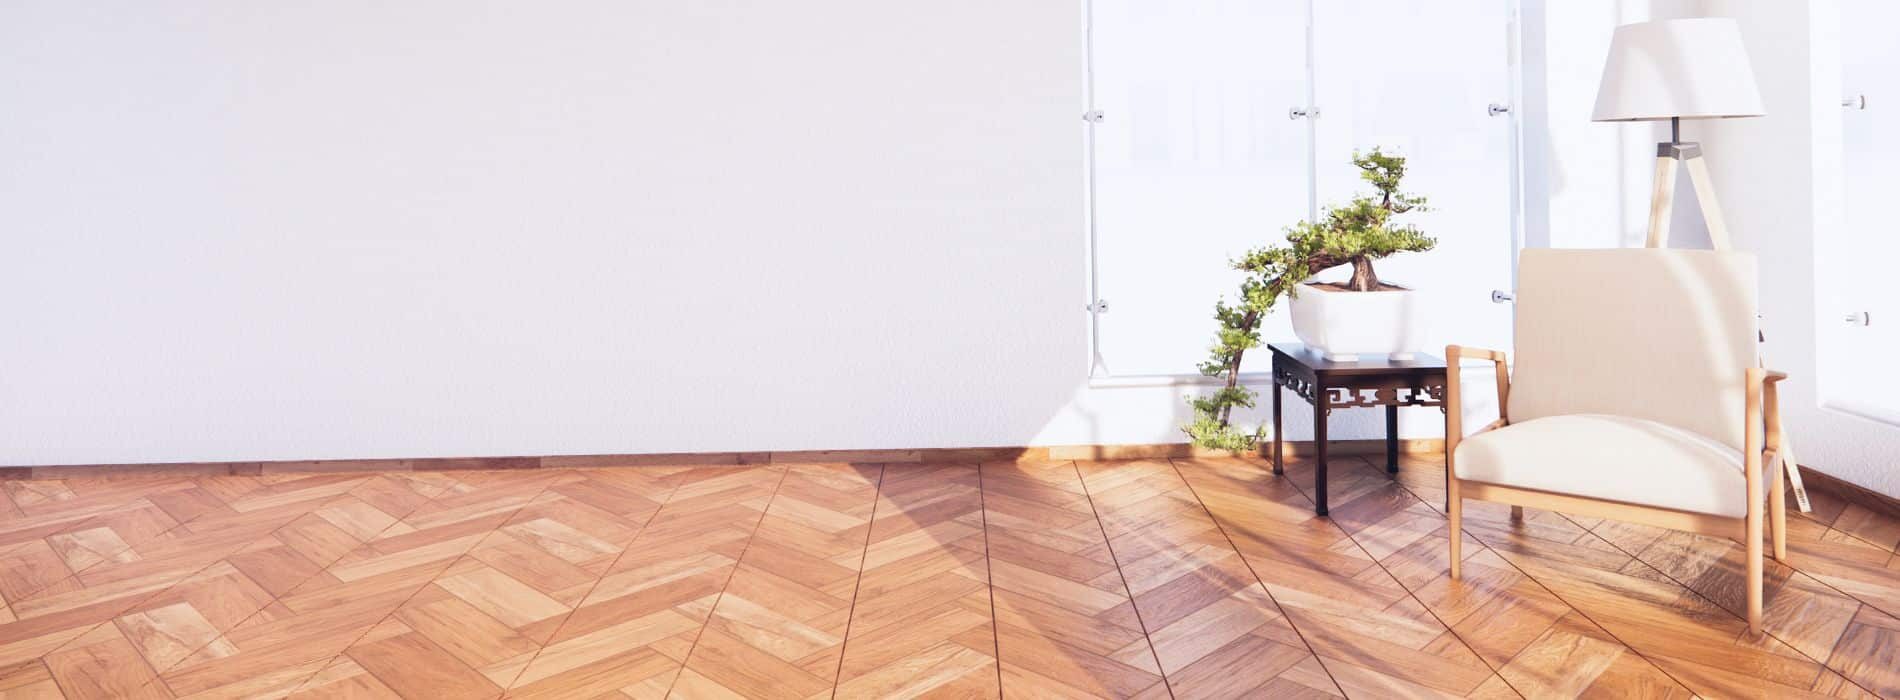 Experience the beauty of a professionally restored hardwood floor in Rotherhithe, SE15. Our experts at Mr Sander® skillfully restored a 5-year-old floor using Bona 2.5K Frost whitewashing and Traffic HD 15% sheen matte lacquer. This durable and stunning finish ensures long-lasting beauty for years to come.